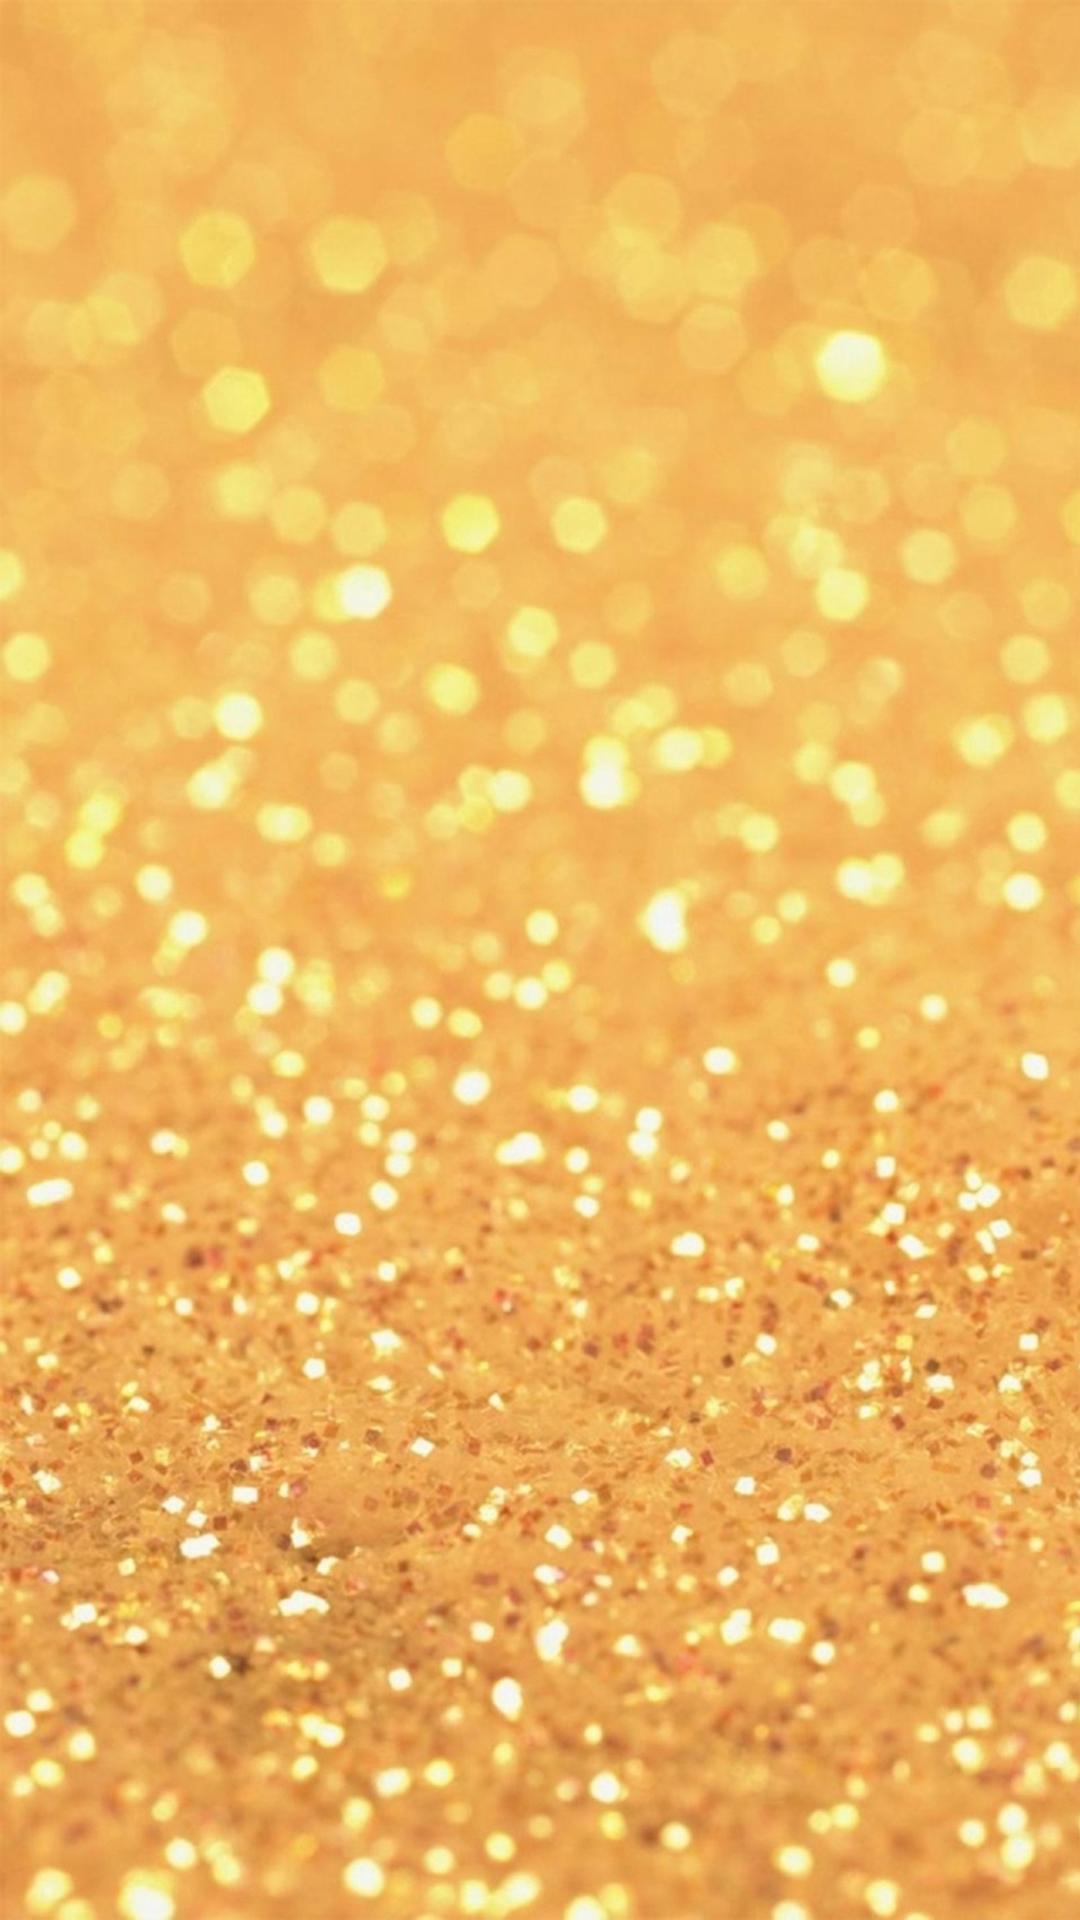 Abstract Golden Blink Shiny Color Background iPhone 8